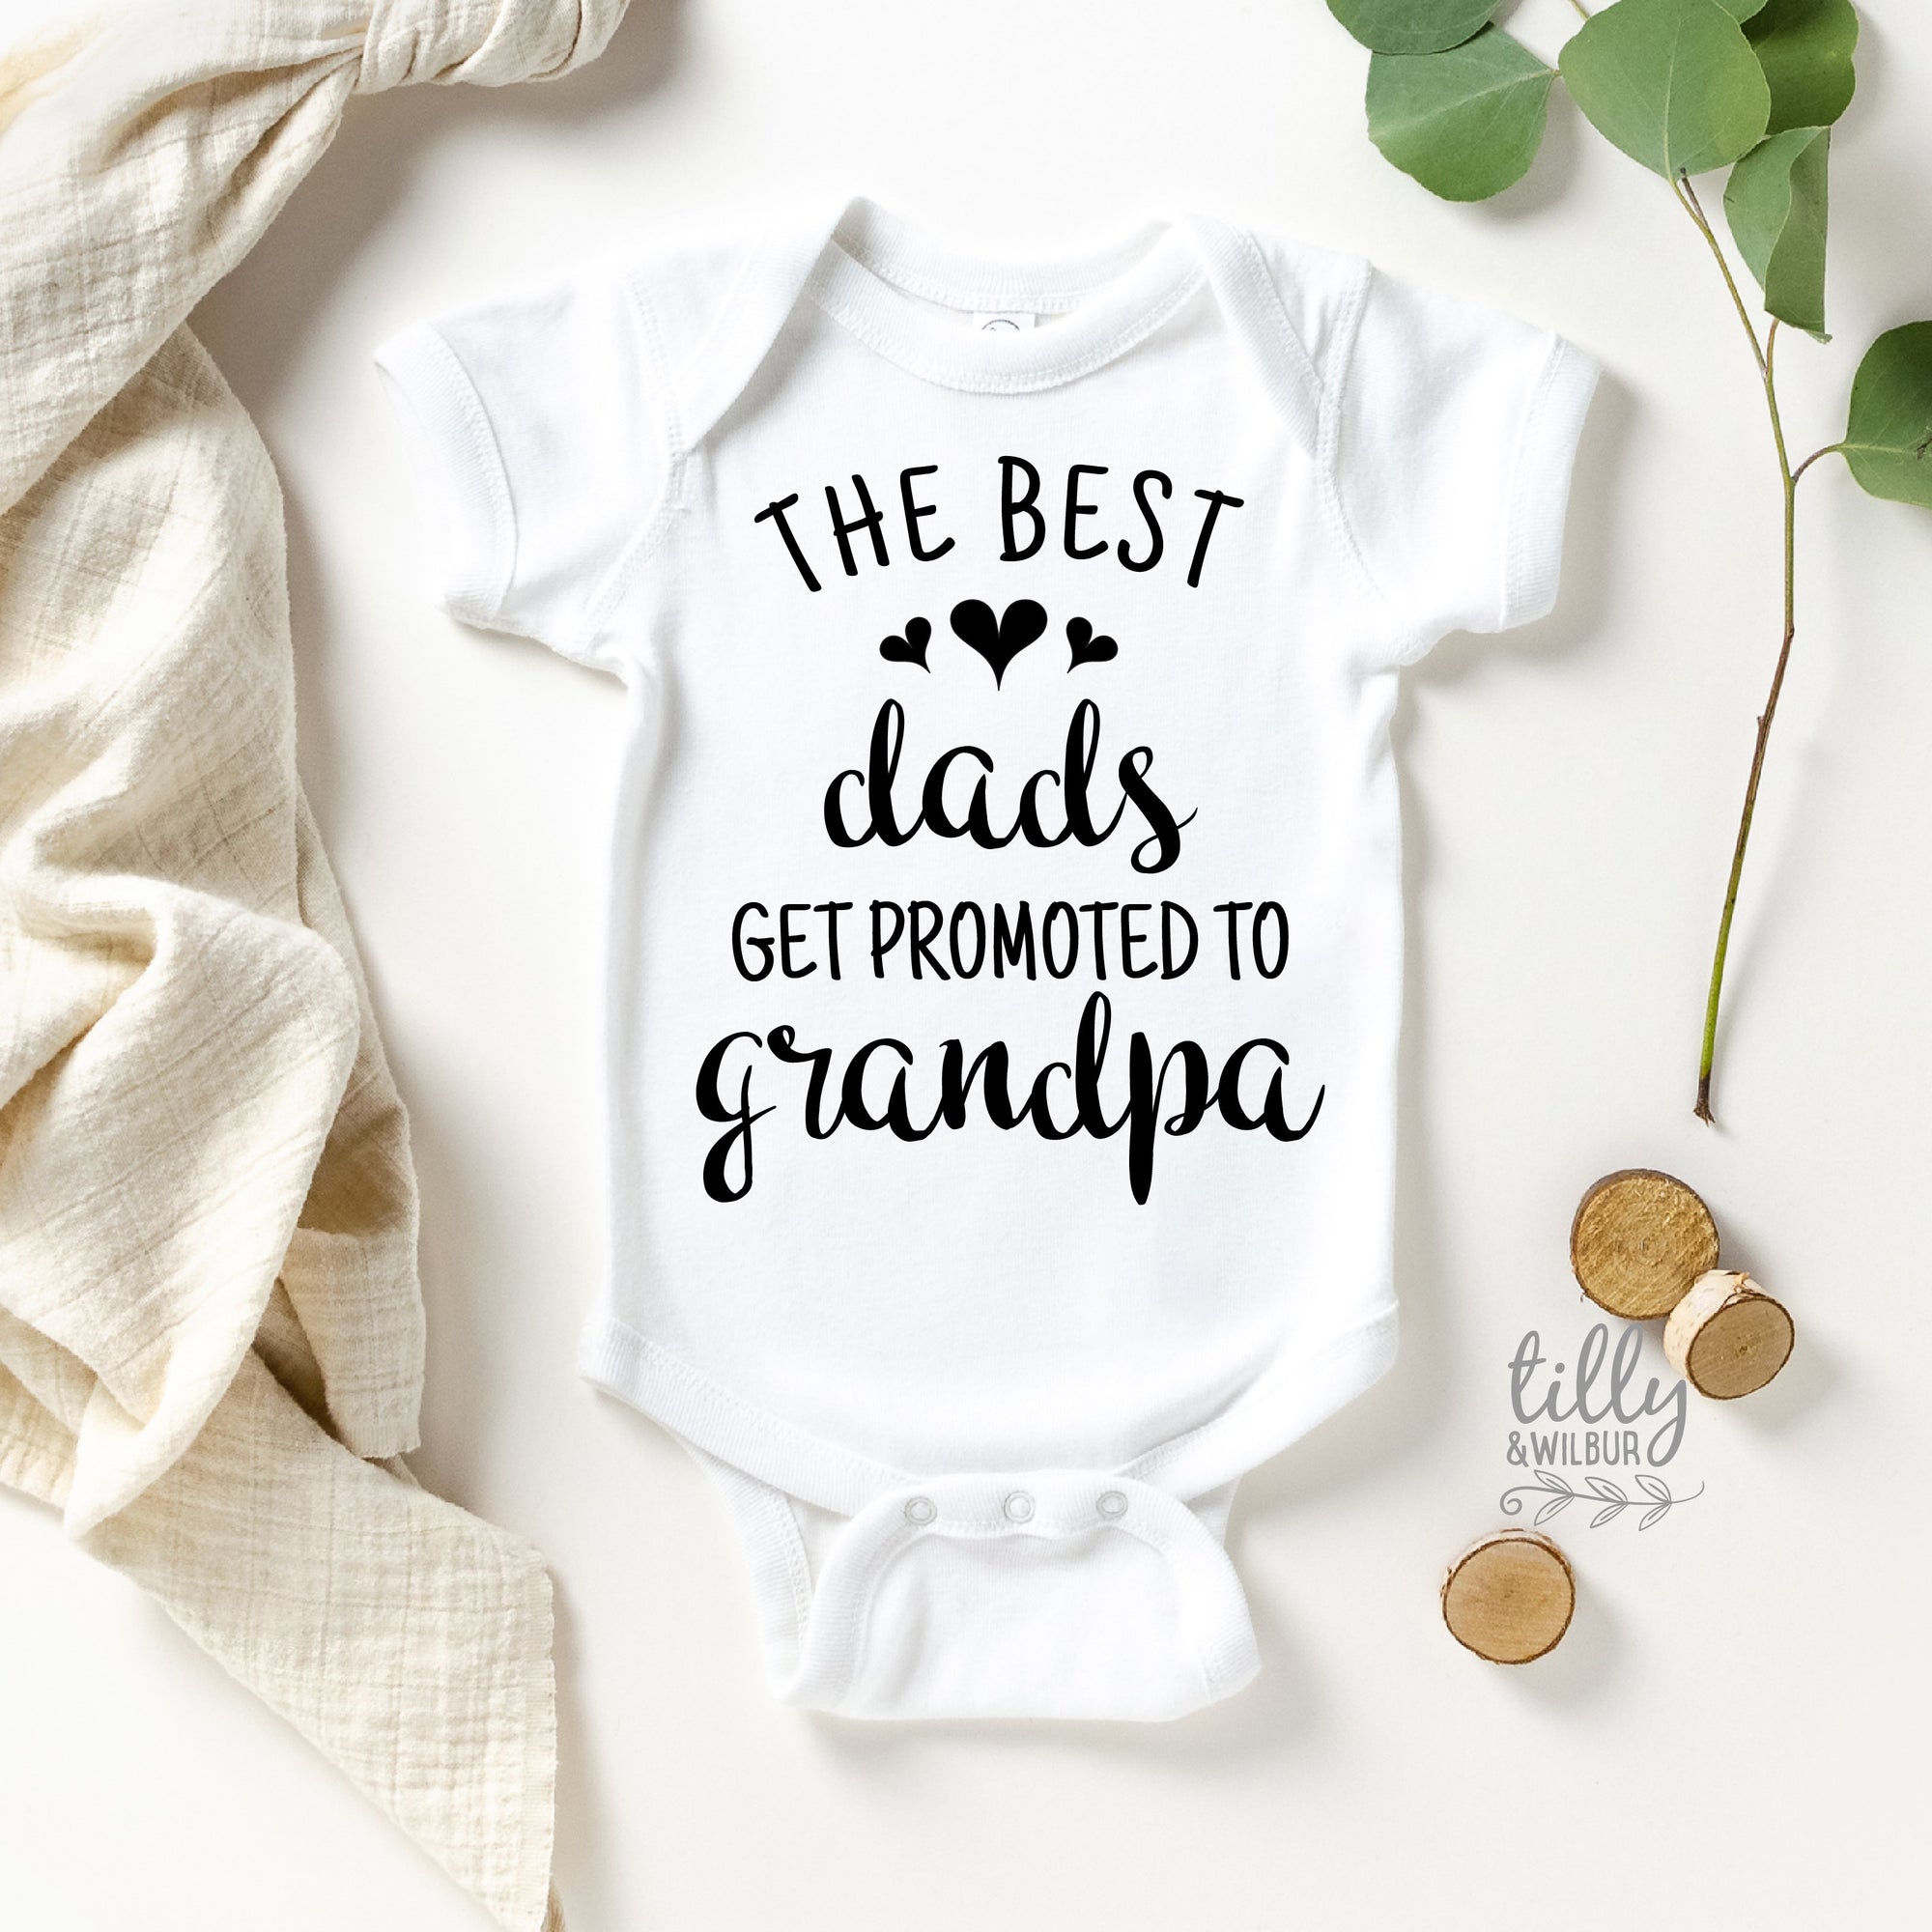 The Best Dads Get Promoted To Grandpa Baby Bodysuit, Grandparents Pregnancy Announcement, New Grandbaby Announcement, Grandpa, Grandad Gift